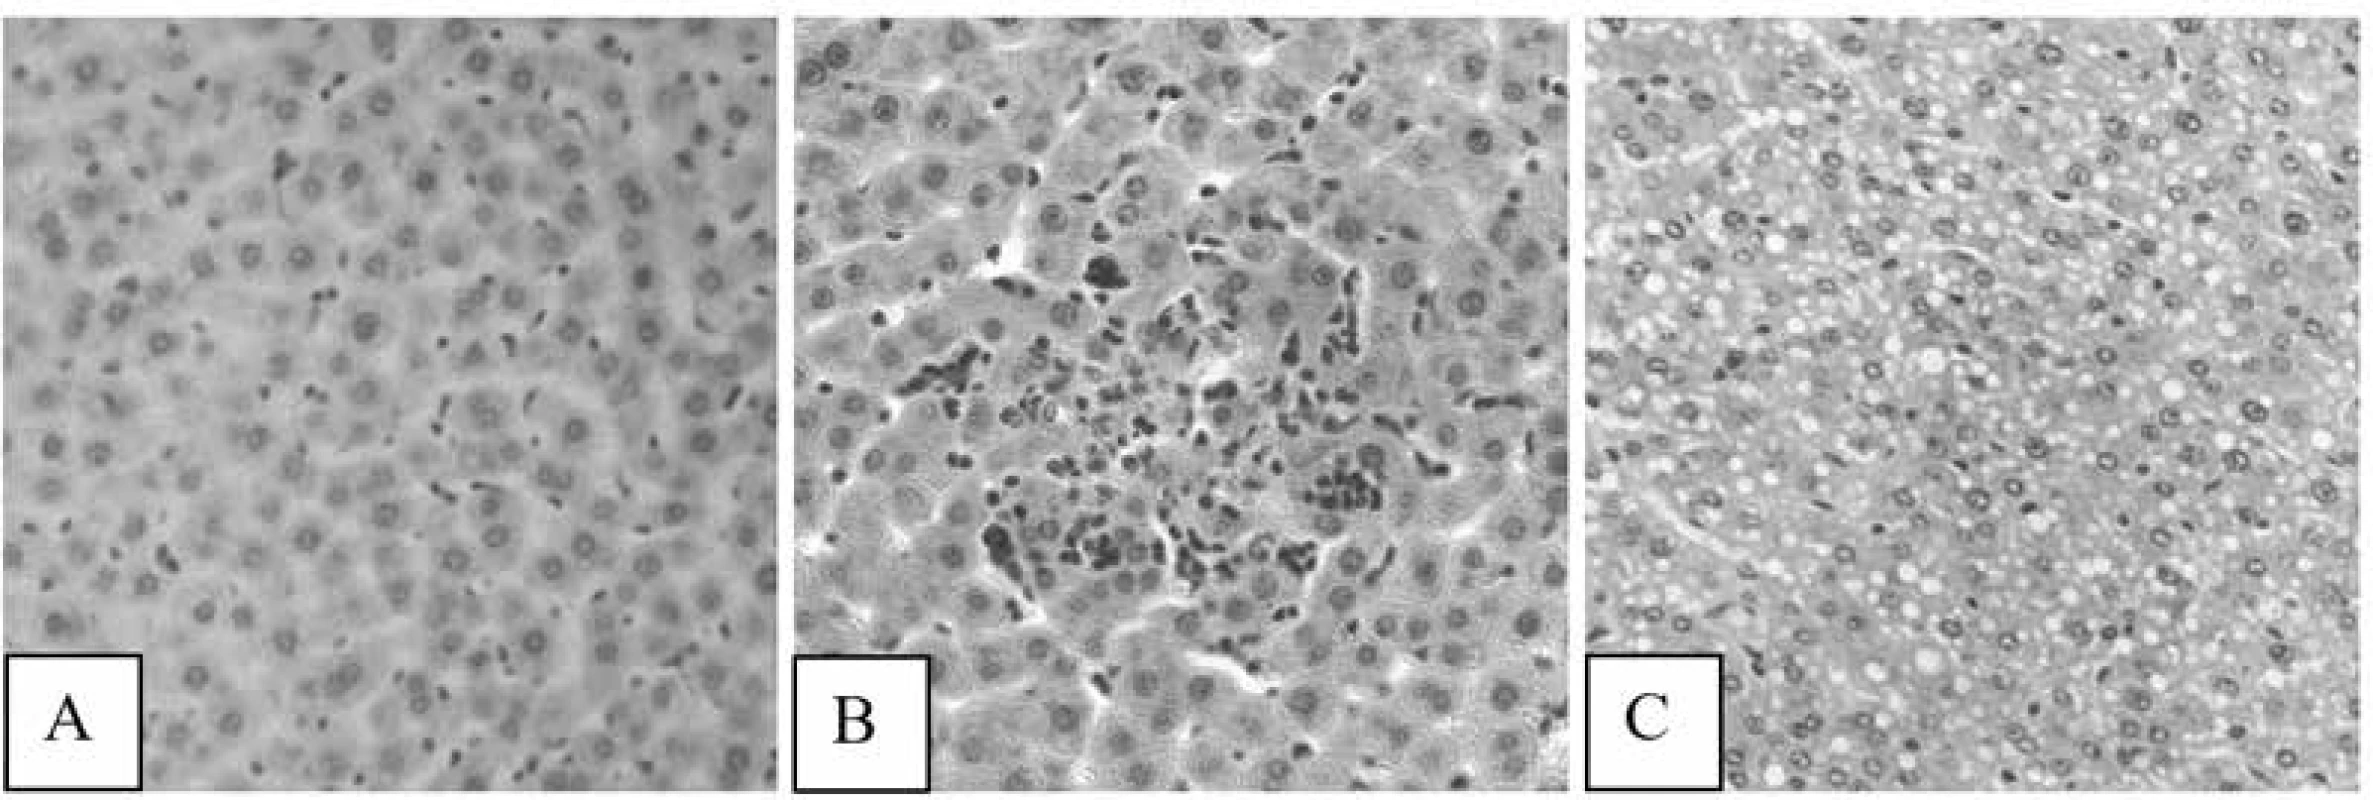 Photomicrographs of samples of liver tissues of intact control rats (A), rats treated with MTX (B,
C): a focus of hepatocyte necrosis (В) (× 250), vacuolar degeneration of hepatocytes (C) (HX&E × 200)